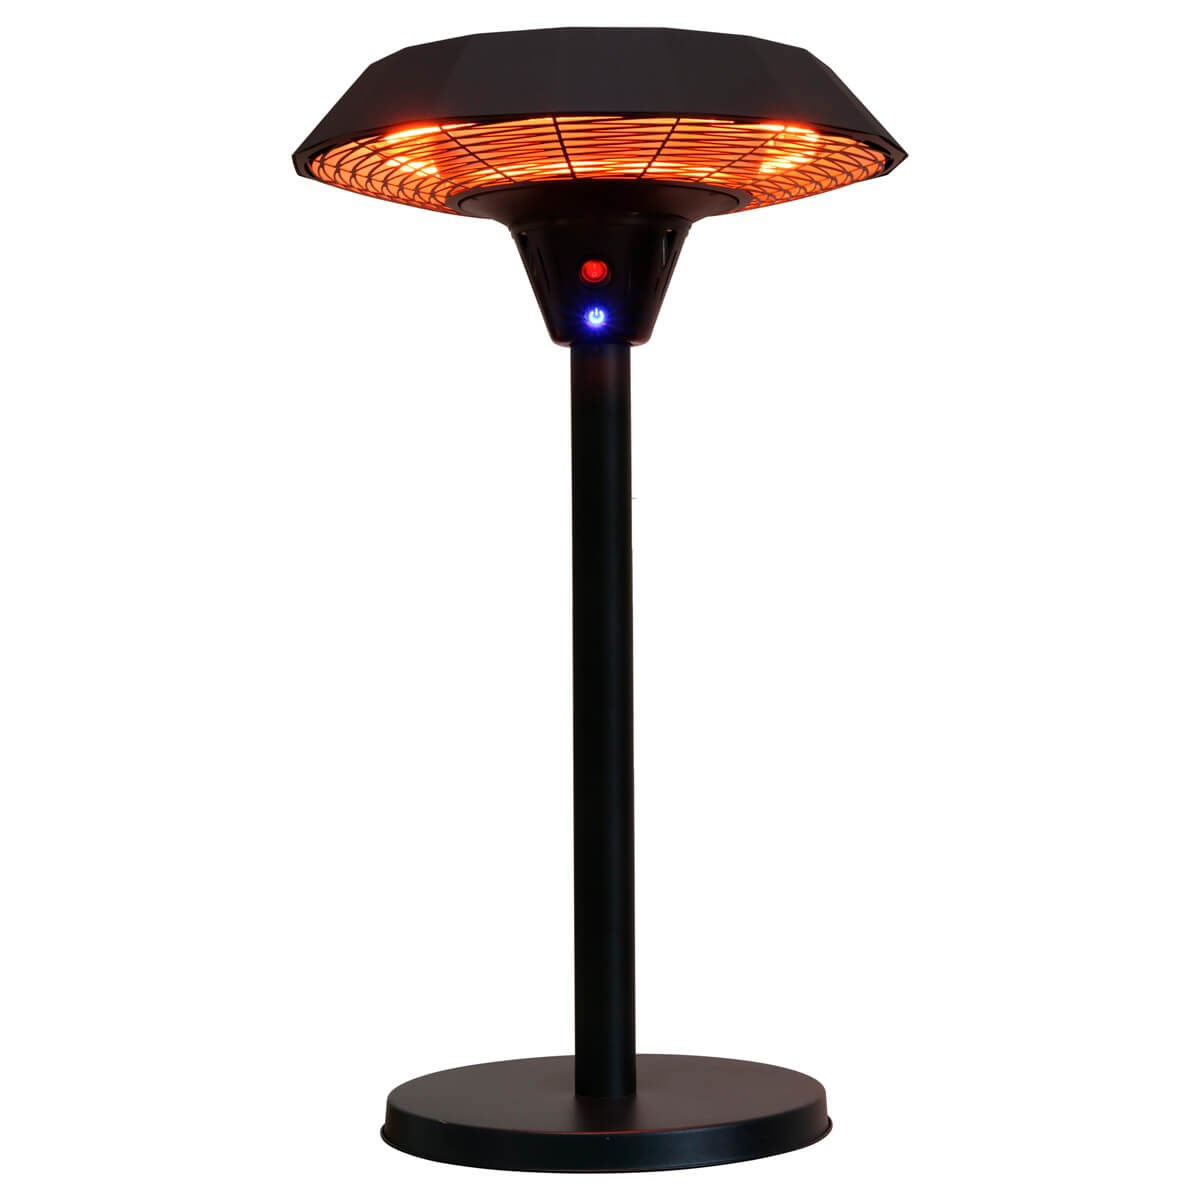 Details About Table Top Patio Heater Tabletop Garden Heater 2000w Halogen Outdoor Heater with regard to size 1200 X 1200